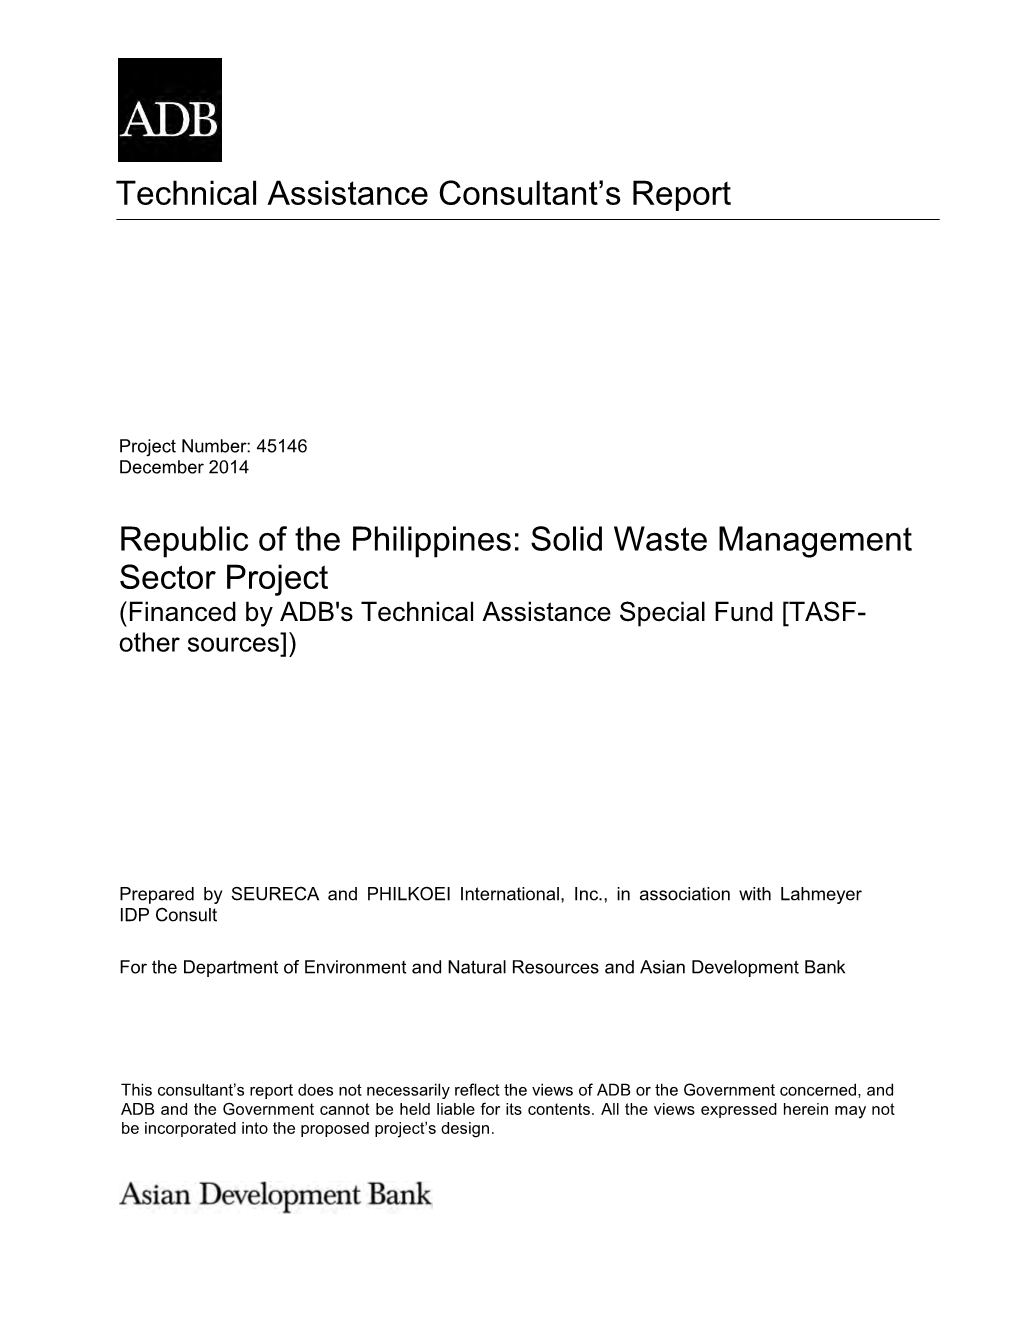 Solid Waste Management Sector Project (Financed by ADB's Technical Assistance Special Fund [TASF- Other Sources])